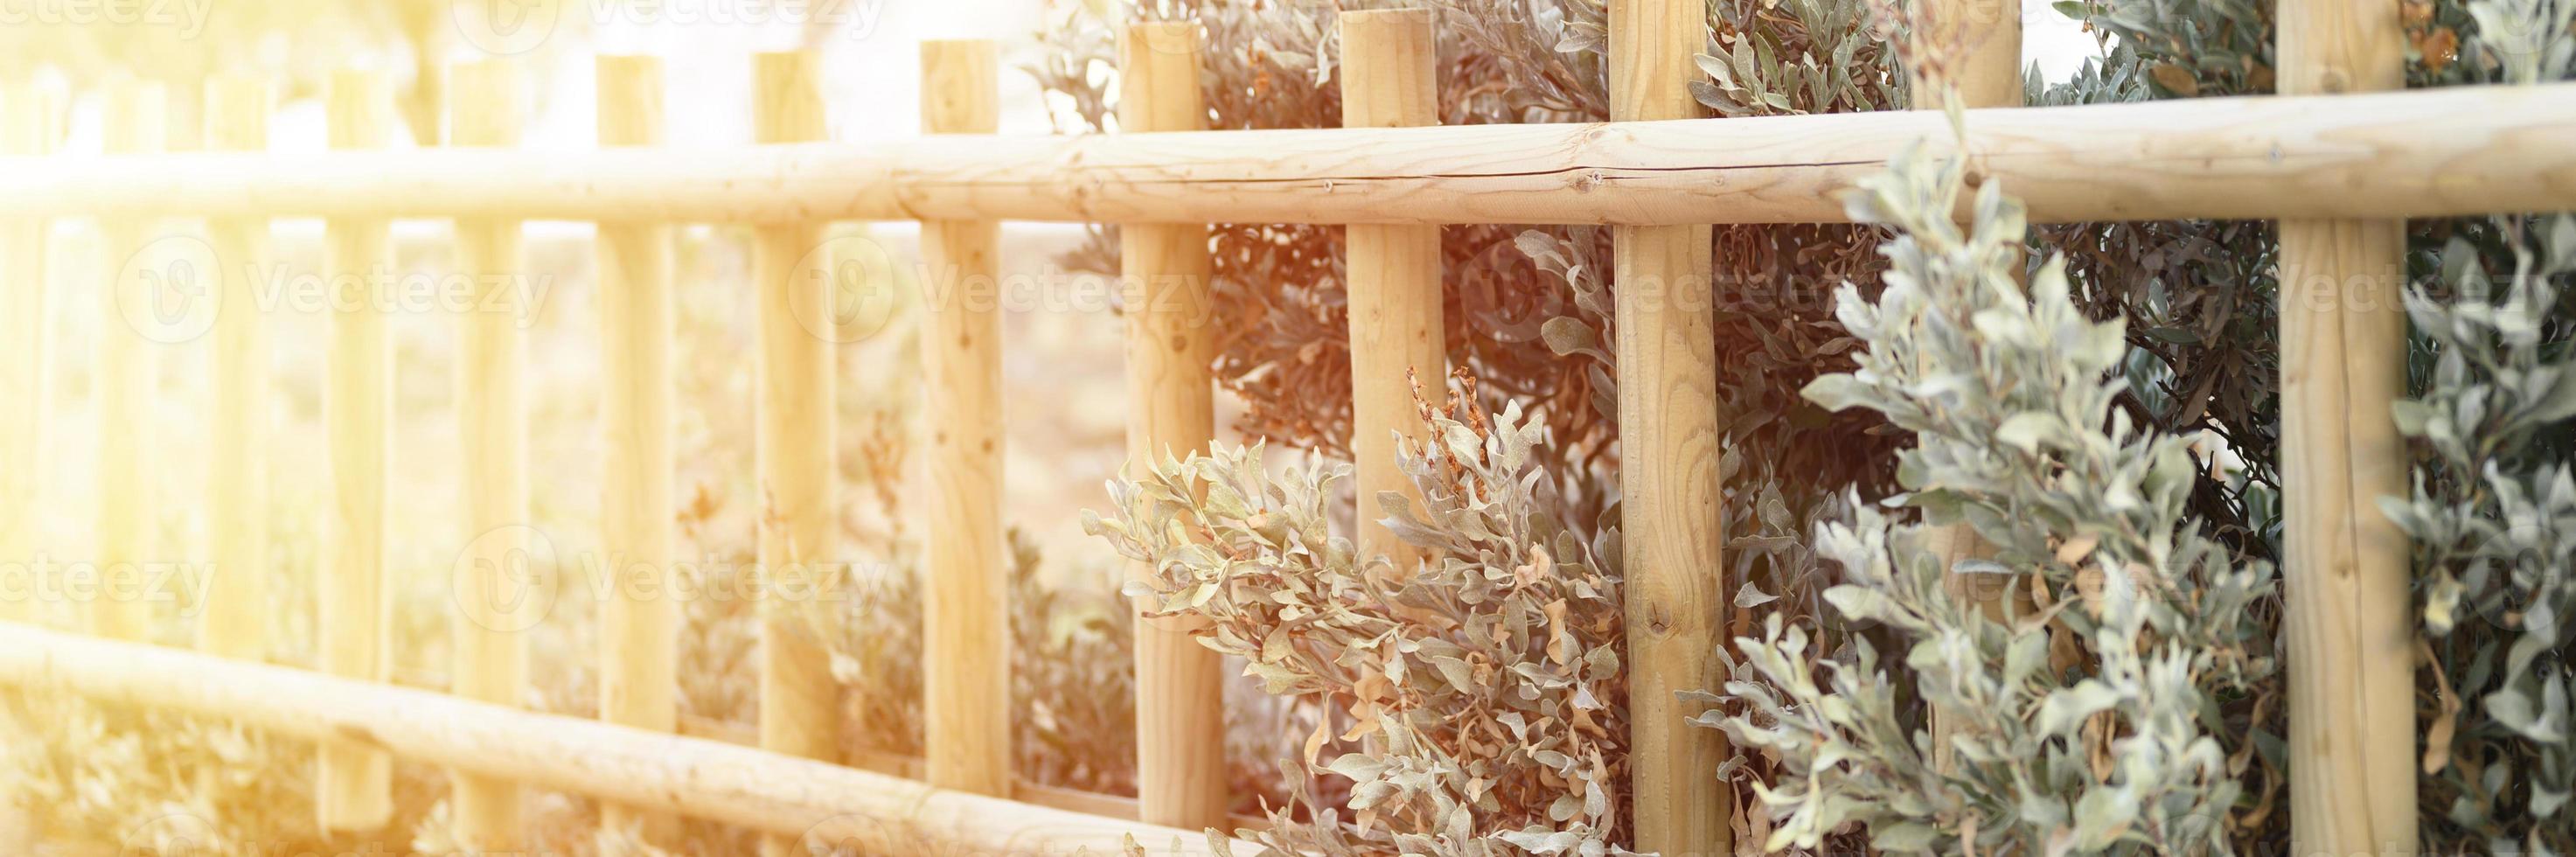 Decorative wooden fence and white green bushes plants photo